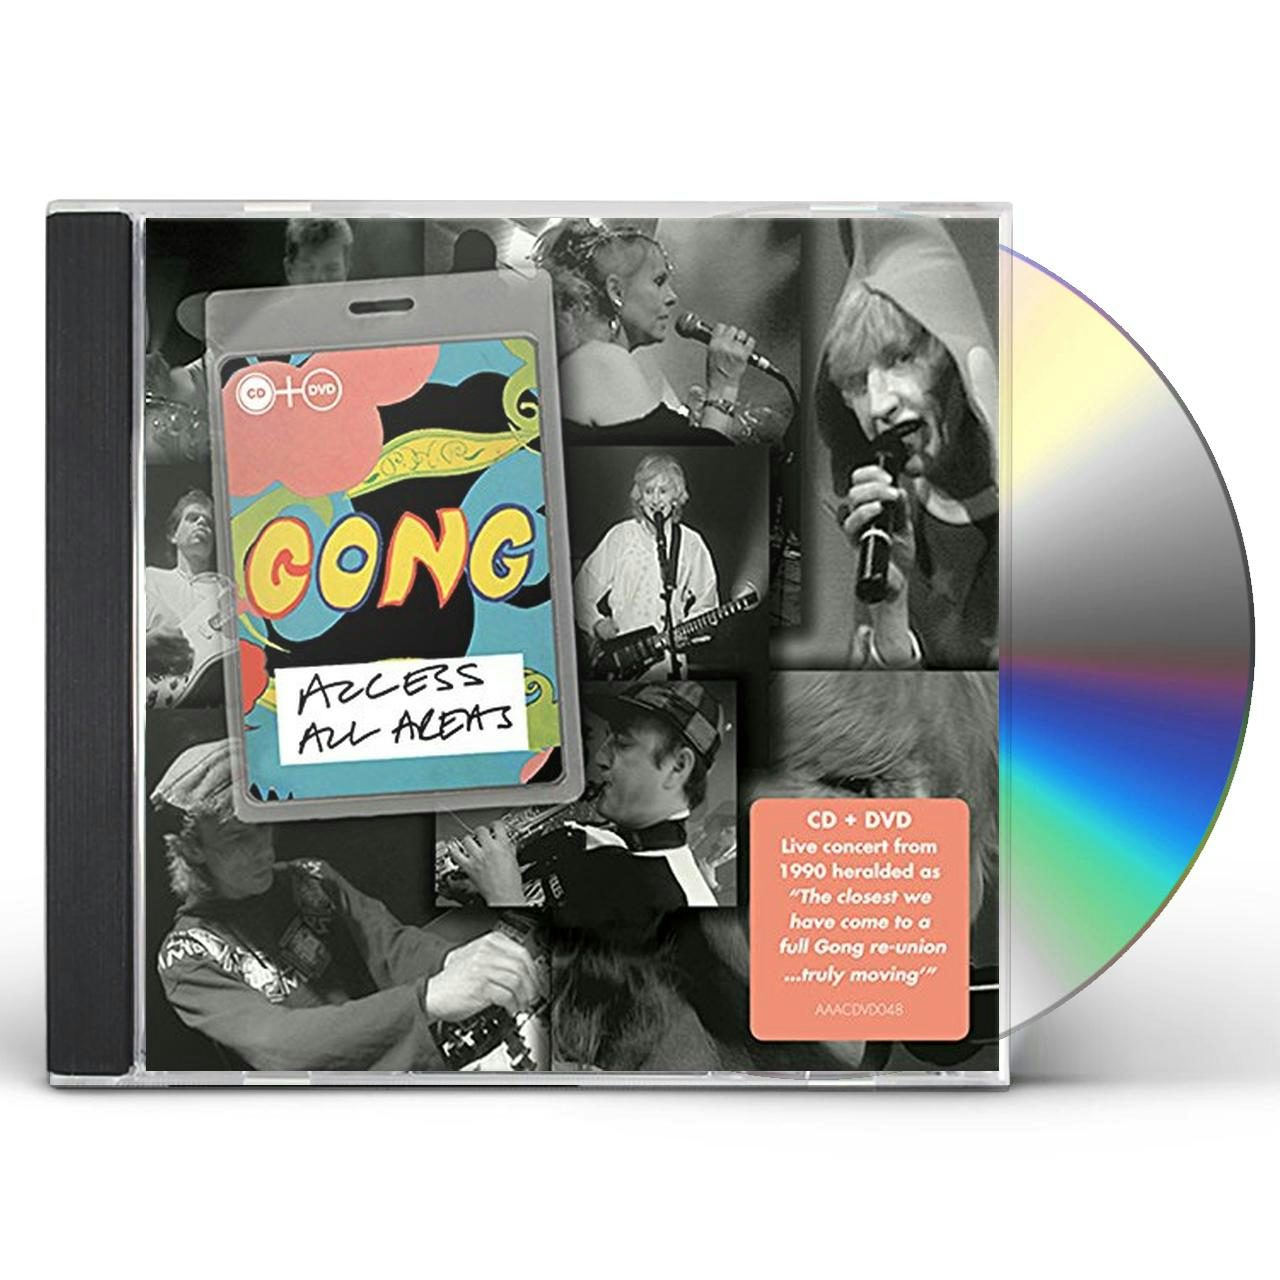 Gong ACCESS ALL AREAS CD